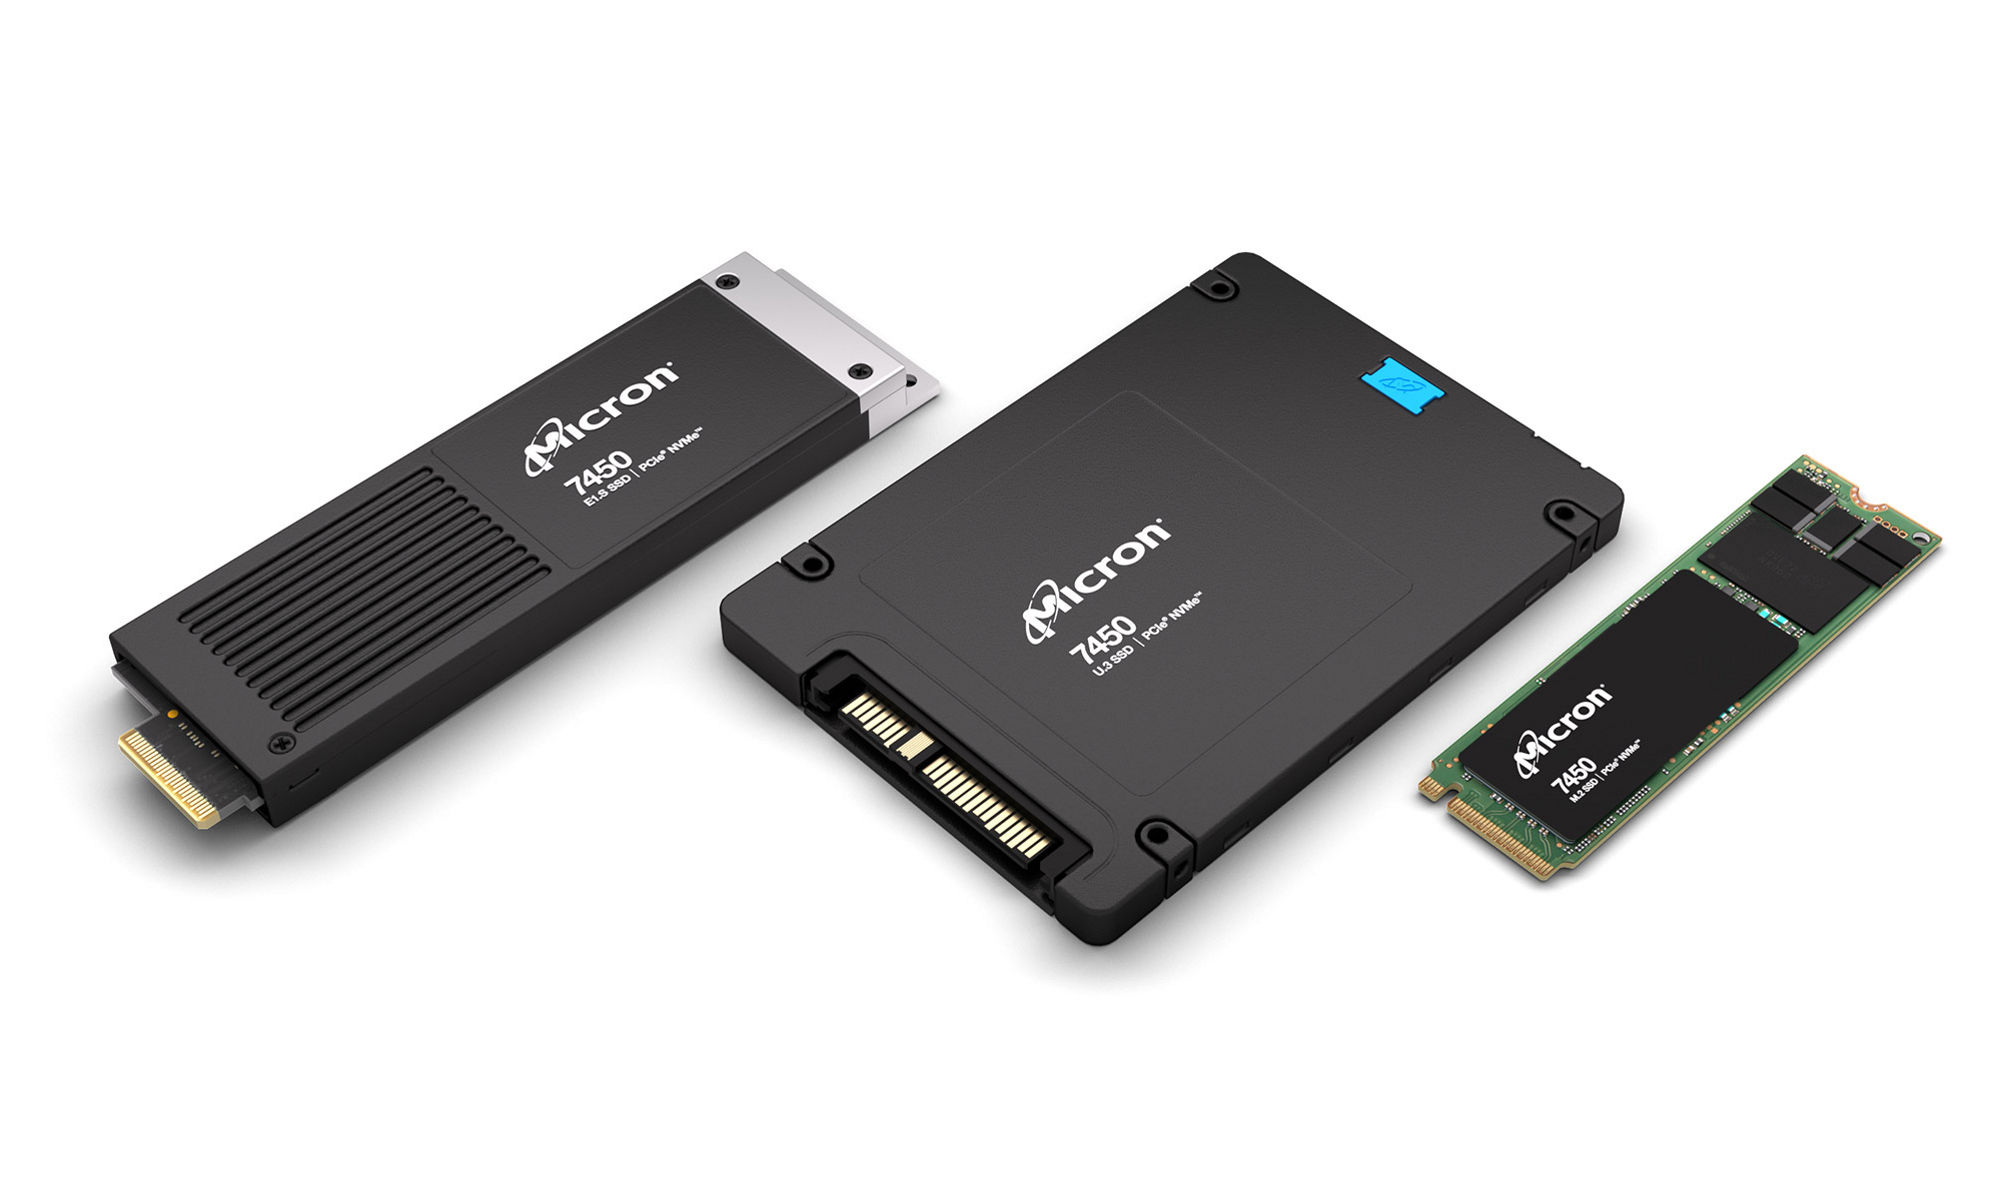 Micron 7450 NVMe SSDs in three form factors